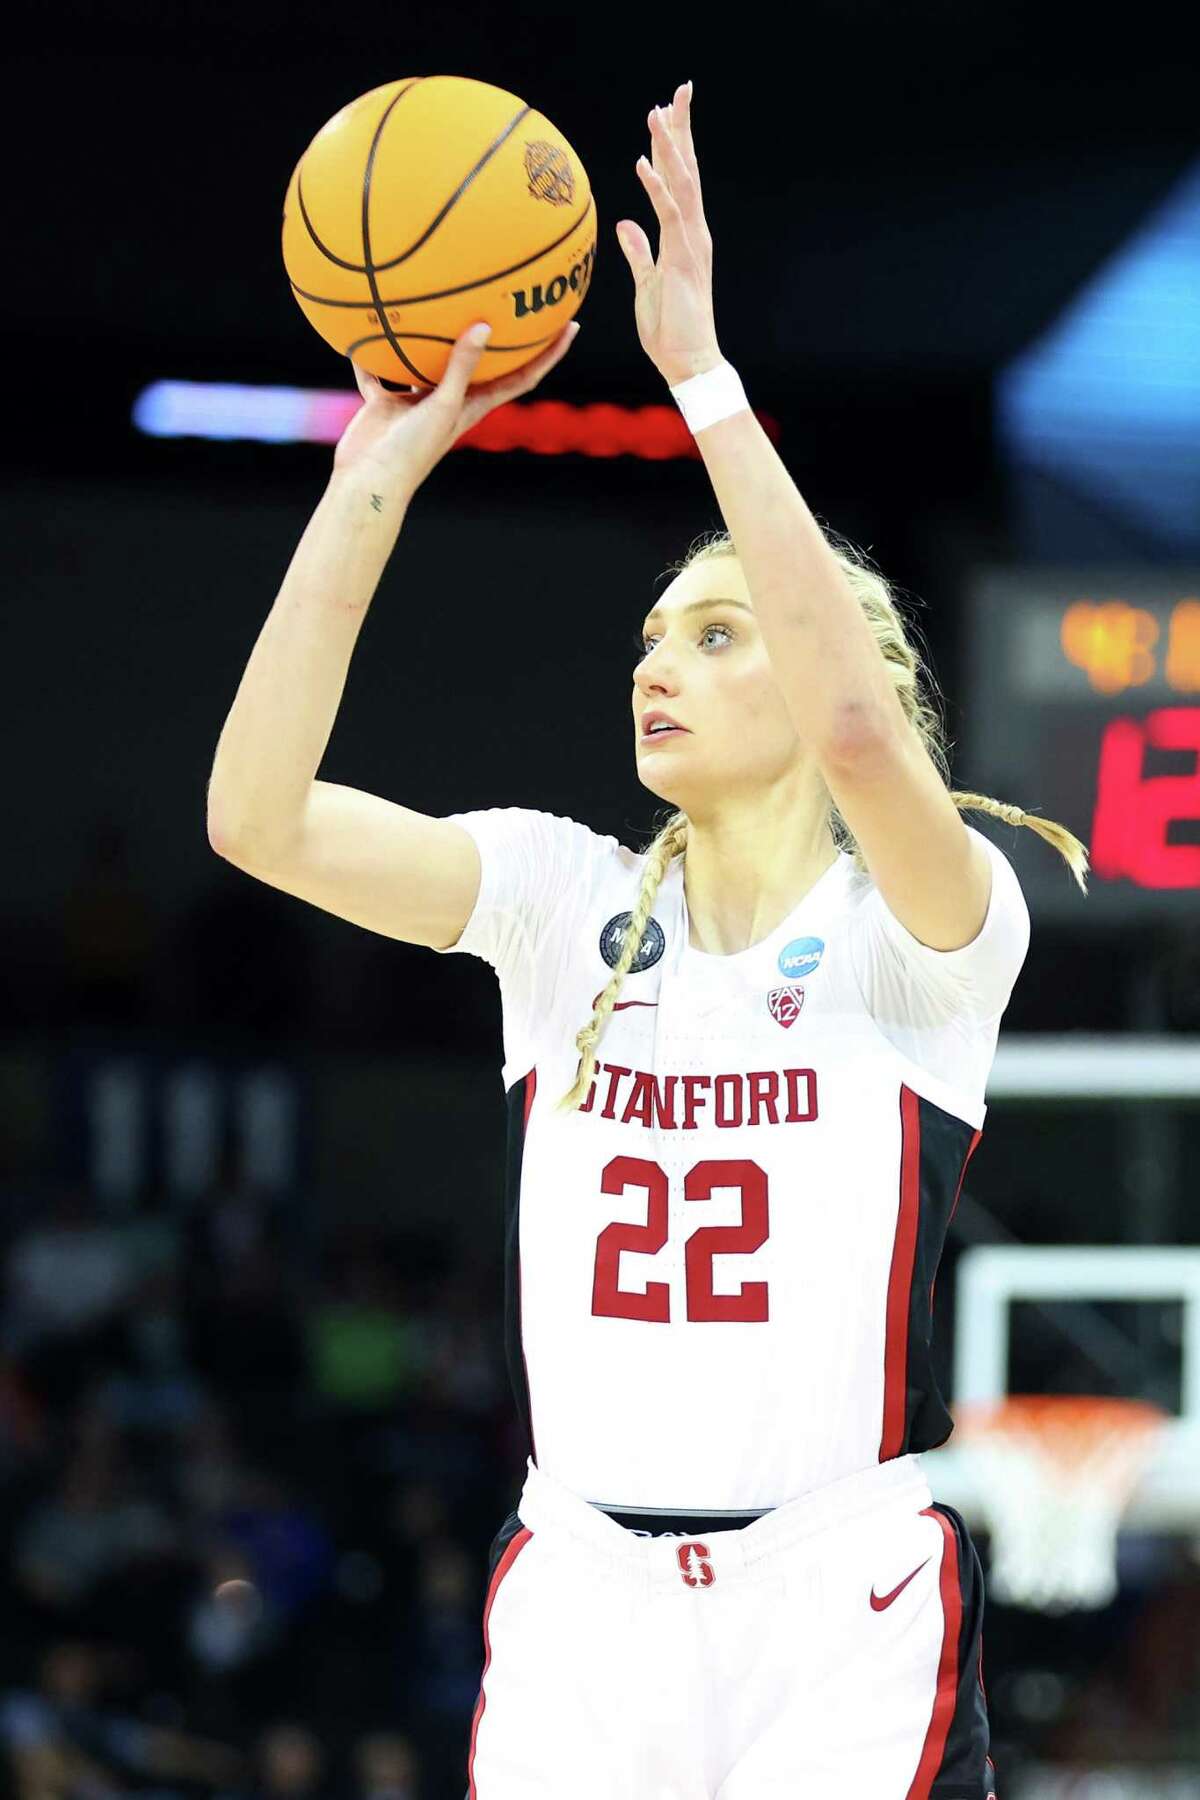 SPOKANE, WASHINGTON - MARCH 27: Cameron Brink #22 of the Stanford Cardinal shoots the ball during the third quarter against the Texas Longhorns in the NCAA Women's Basketball Tournament Elite 8 Round at Spokane Veterans Memorial Arena on March 27, 2022 in Spokane, Washington. (Photo by Abbie Parr/Getty Images)